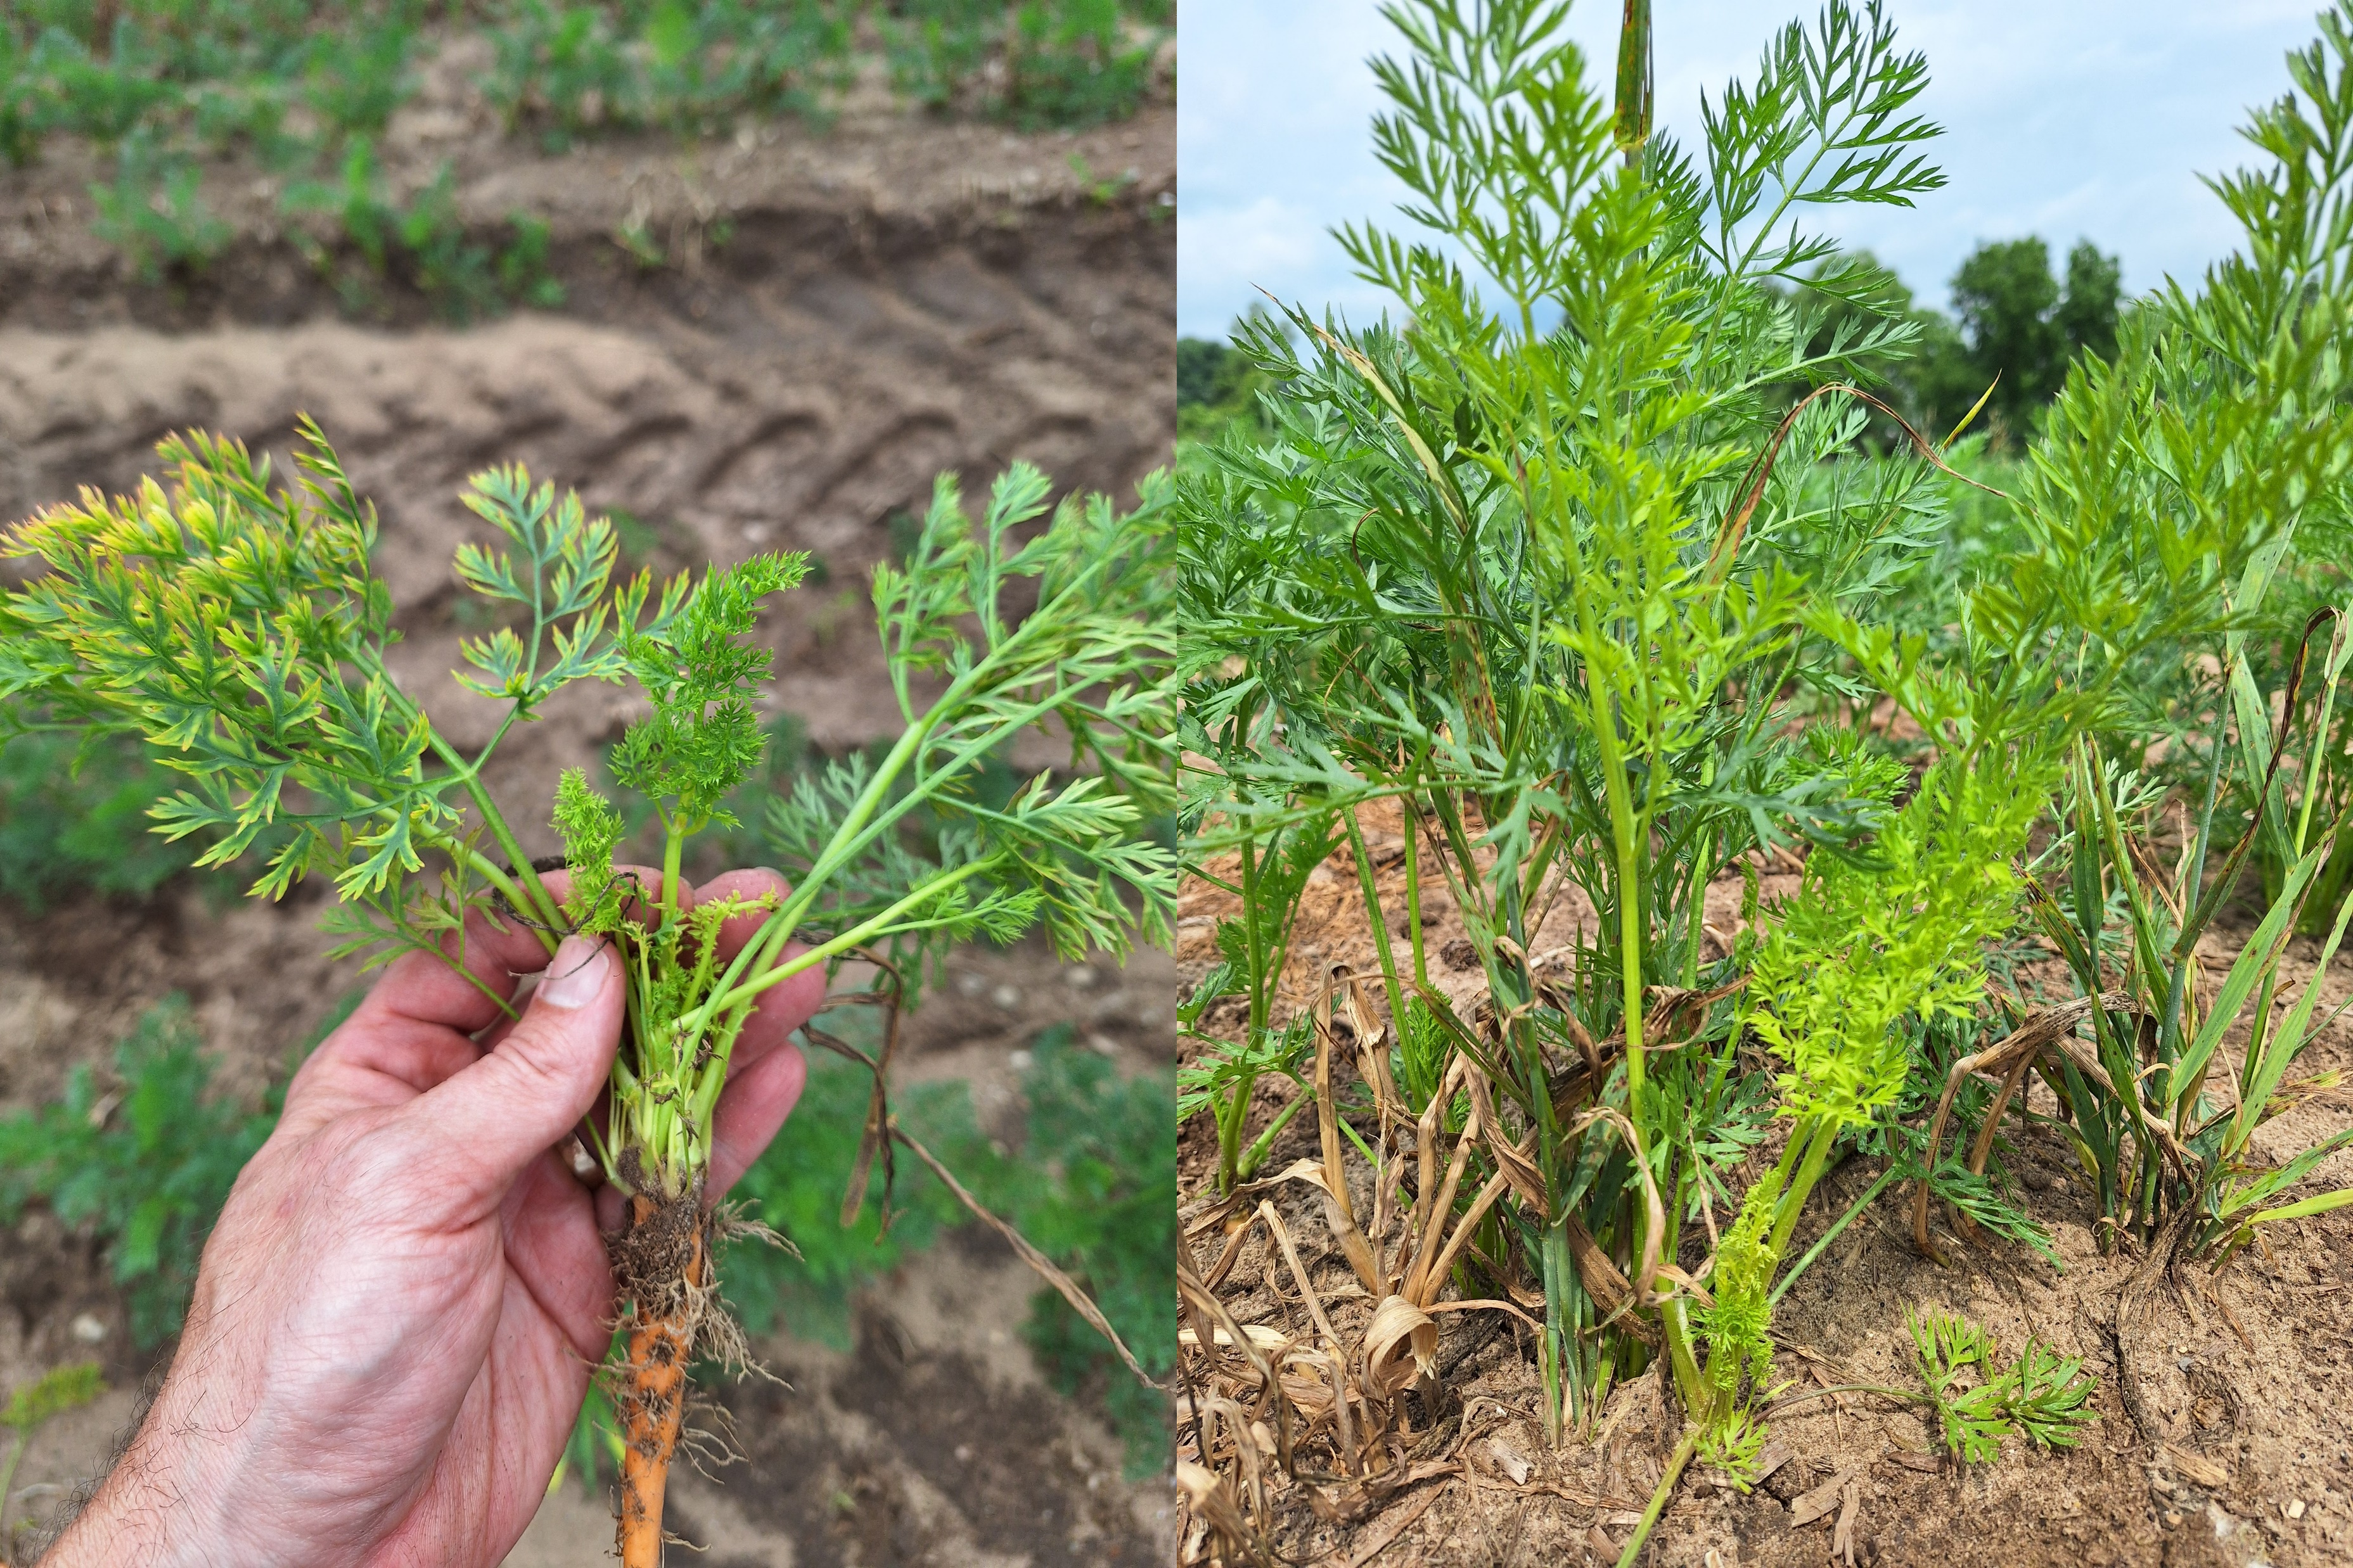 Yellows symptoms in carrots.